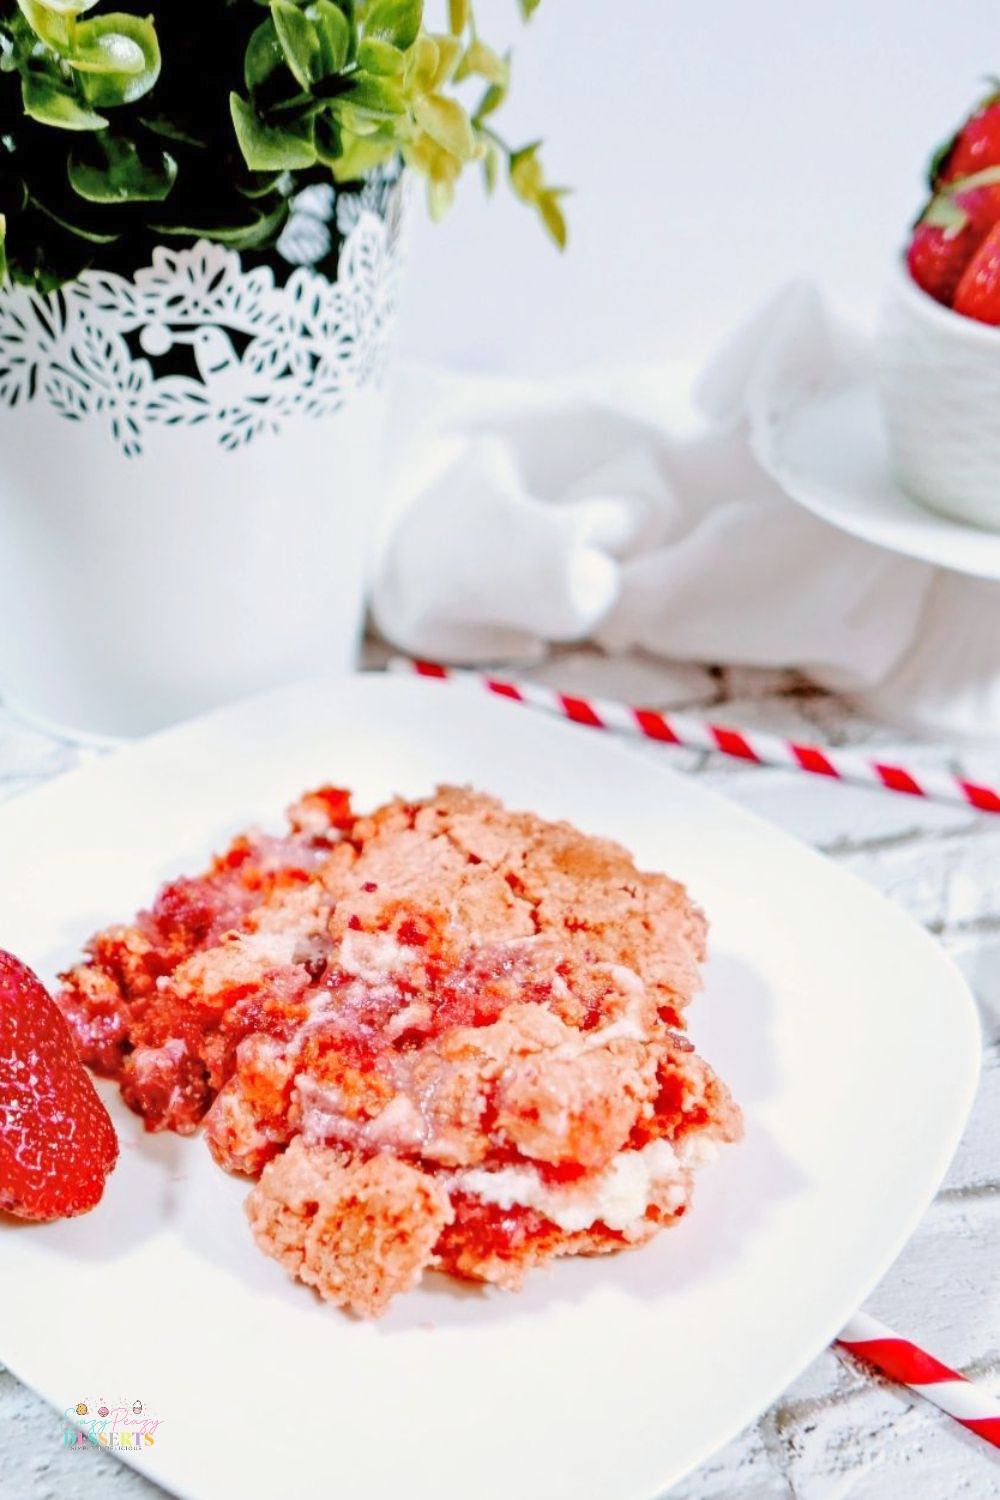 Image of strawberry crumble with cream cheese